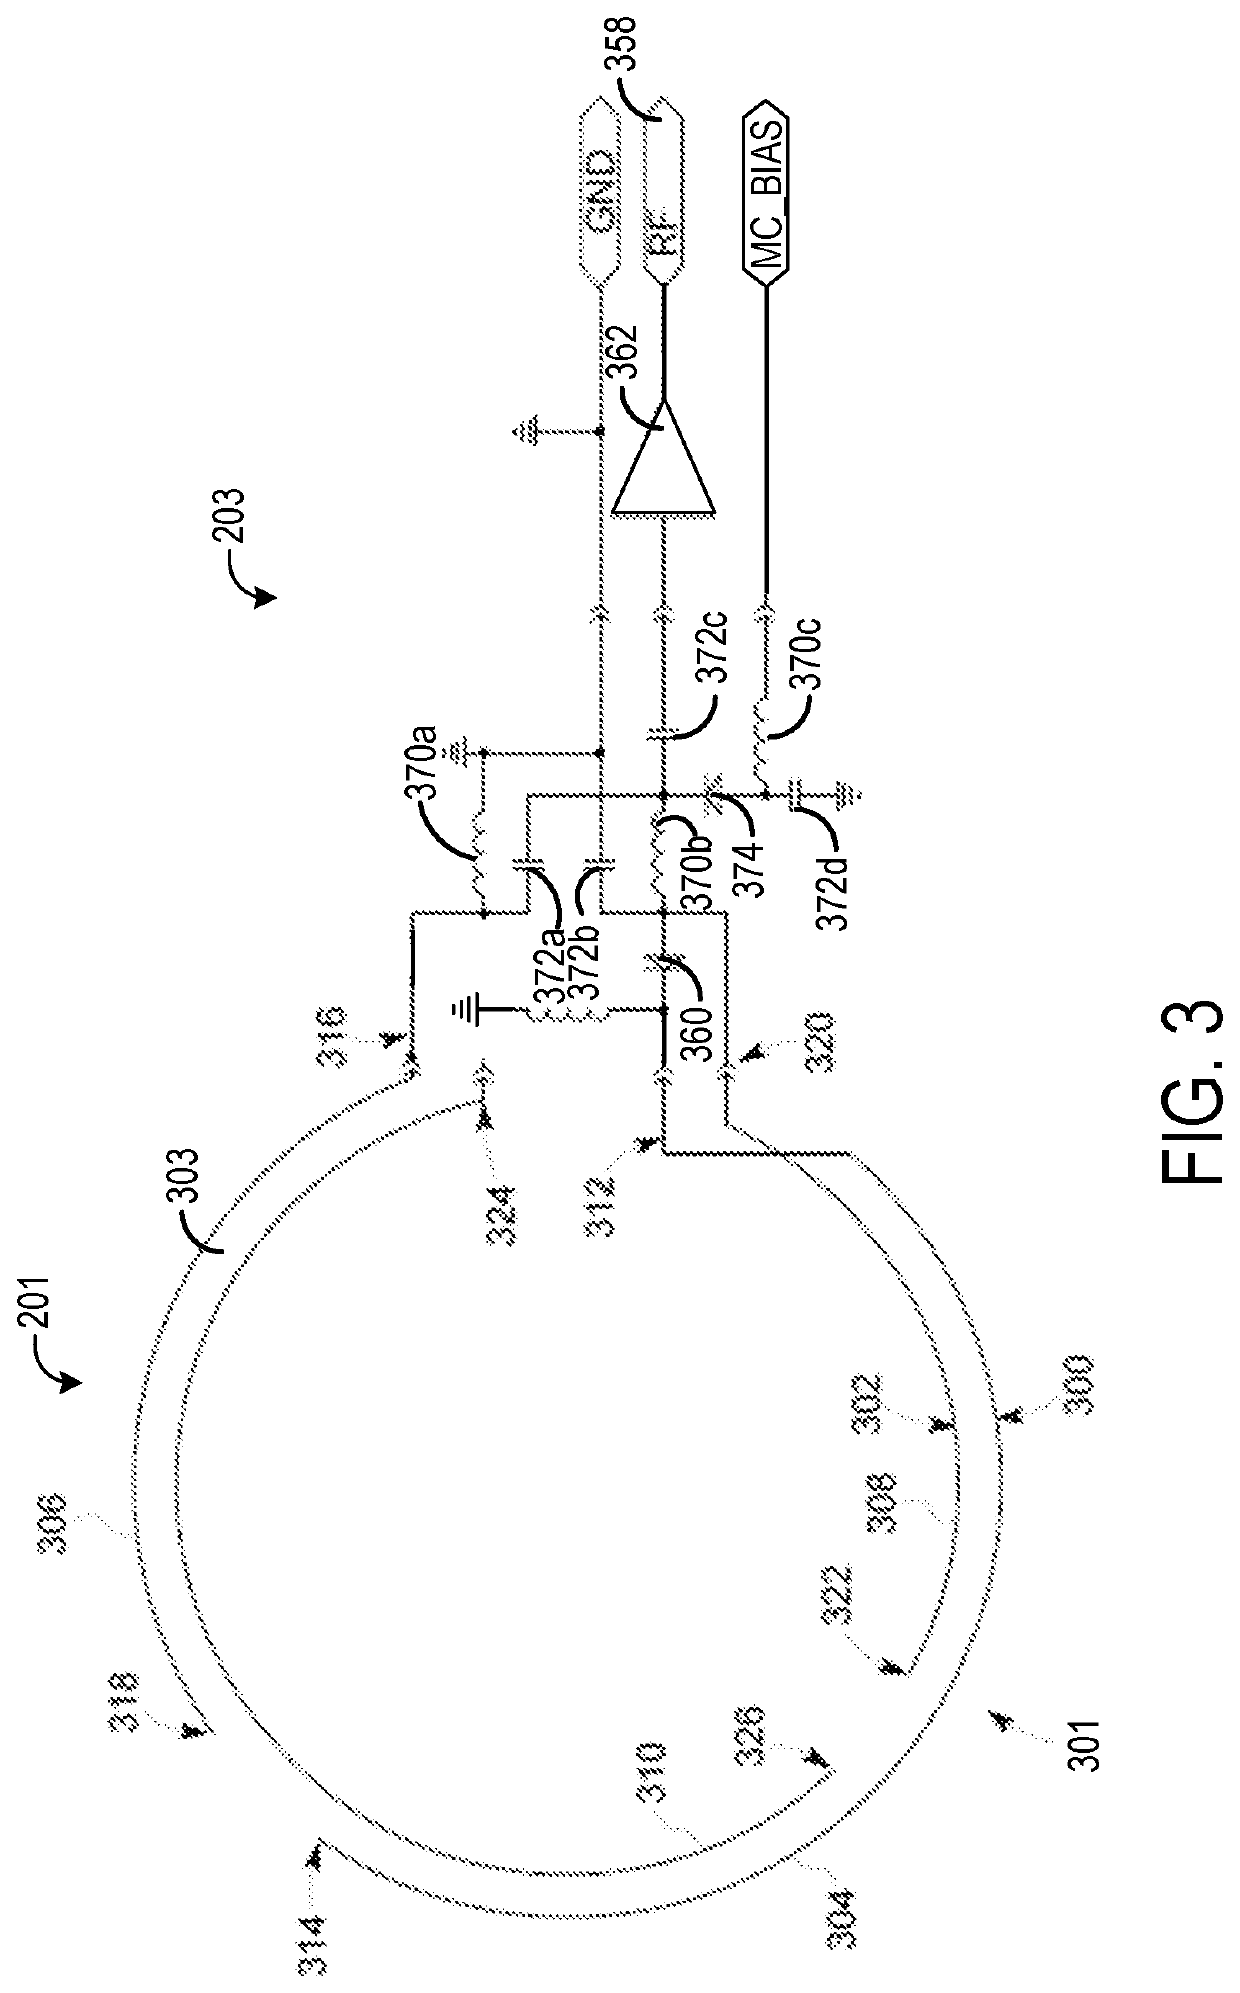 Systems for a radio frequency coil for mr imaging